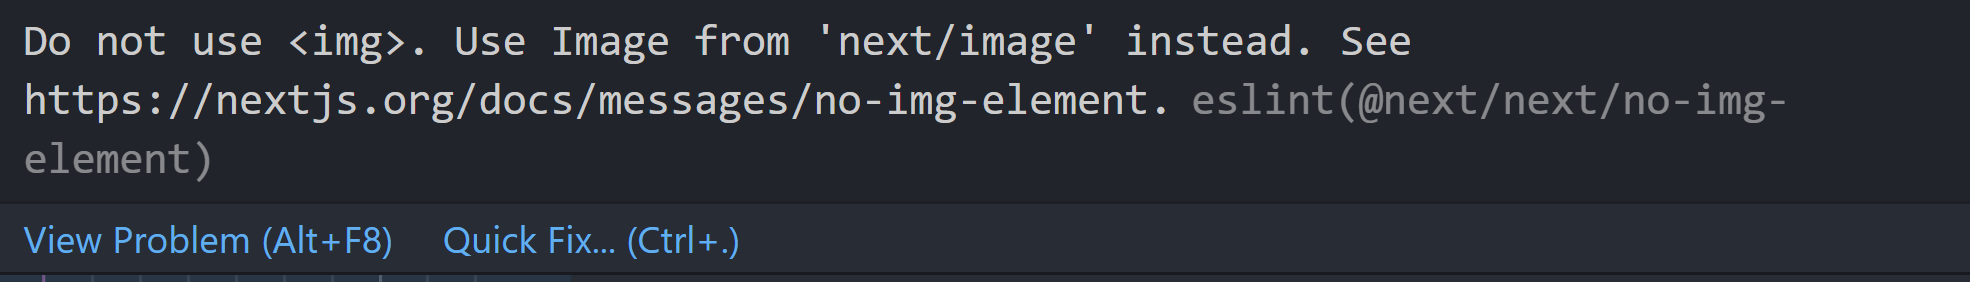 Example of using wrong image tag in Next.js